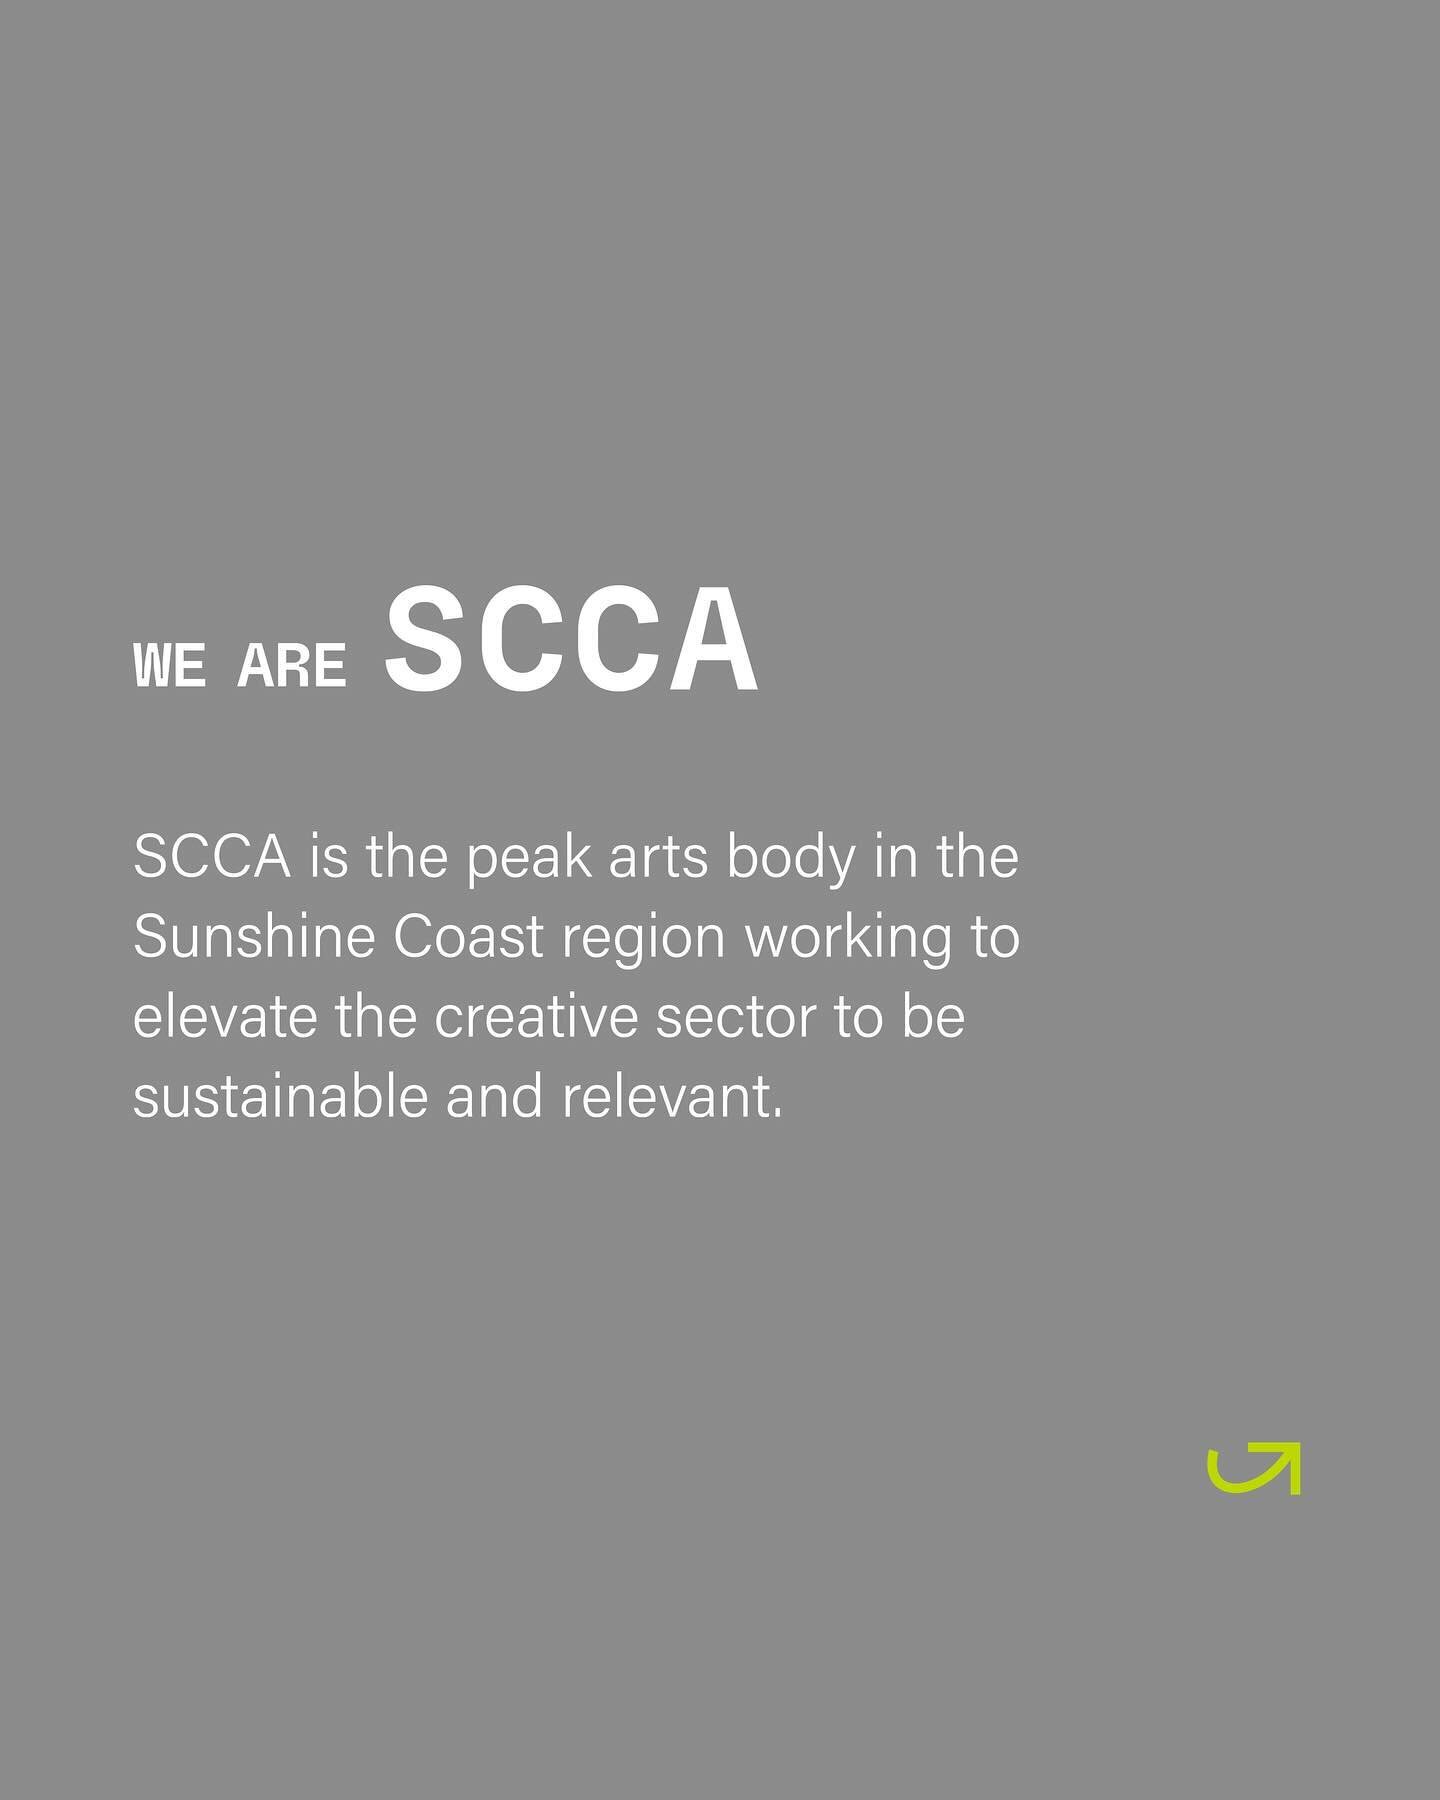 We are SCCA 

SCCA is the peak arts body in the Sunshine Coast region working to elevate the creative sector to be sustainable and relevant 

SCCA supports the creative sector through 
- Professional development 
- Leadership 
- Advocacy 

As an SCCA